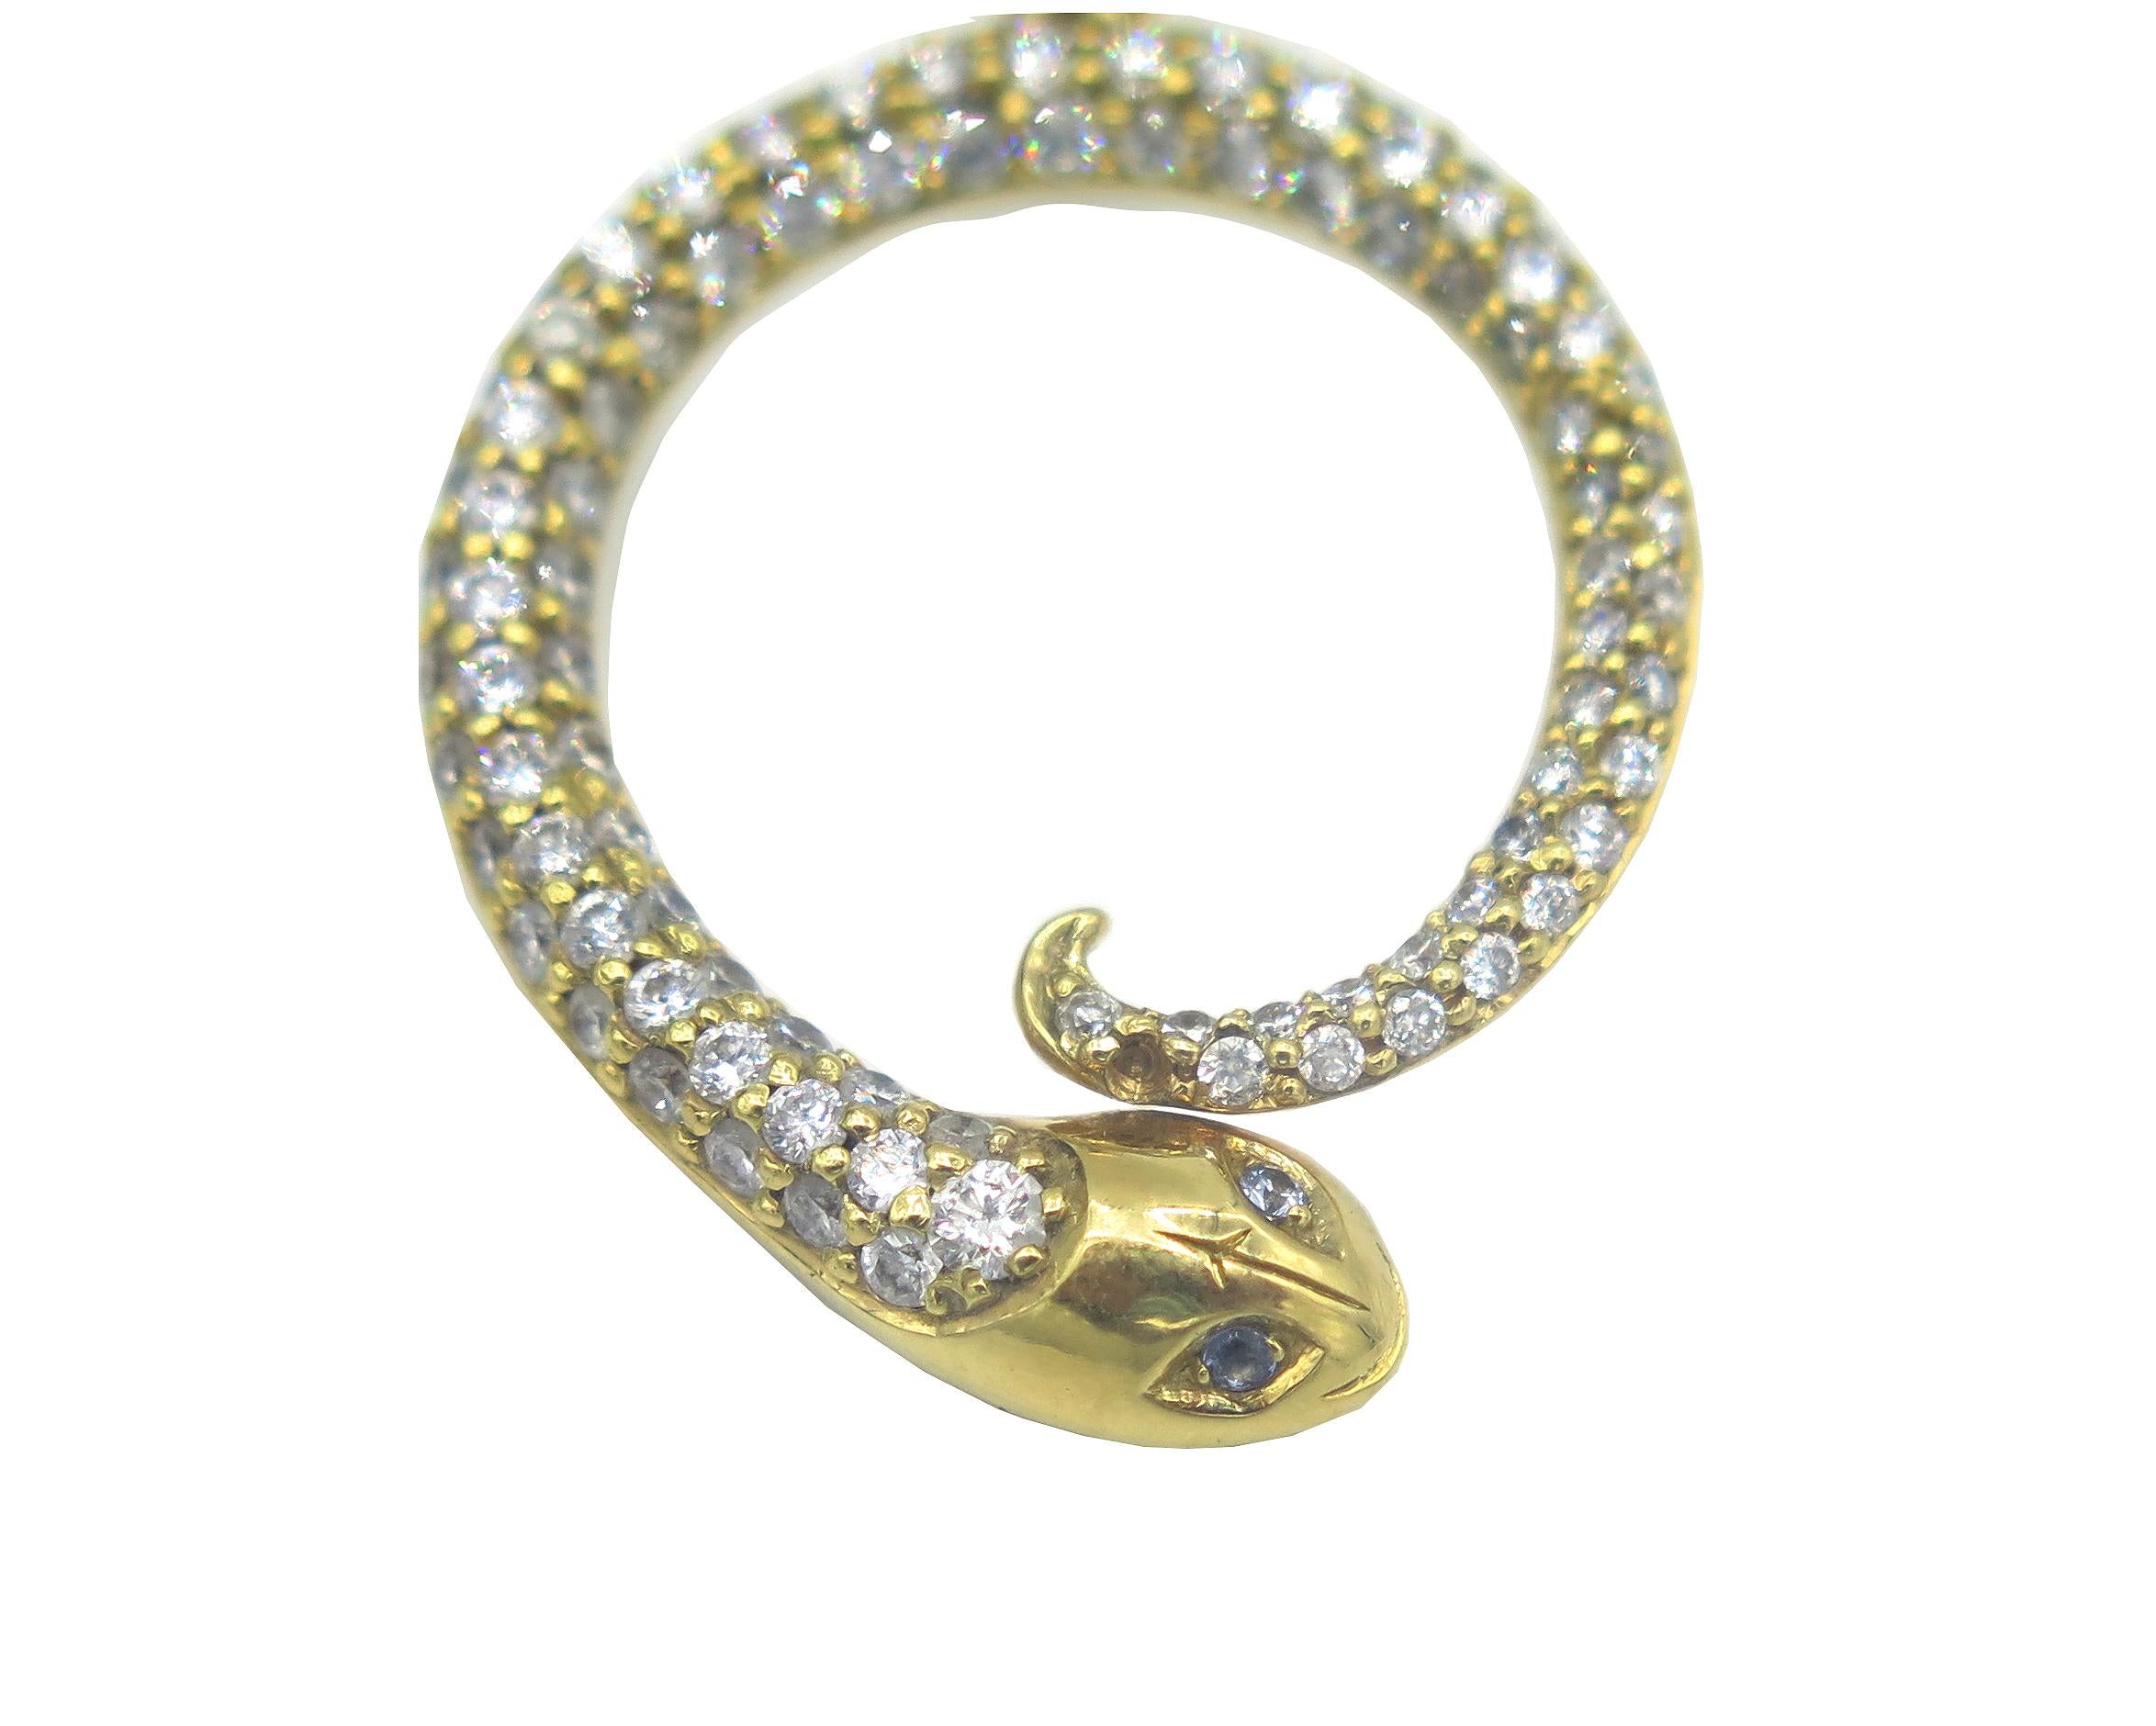 A beautiful, small snake pendant from jeweler Temple St Clair. This, lovely precious diamond pendant, is made out of 18kt yellow gold and weighs 6.47grams.  In, execllent condition and all proper Temple St Clair hallmarks behind the head of the